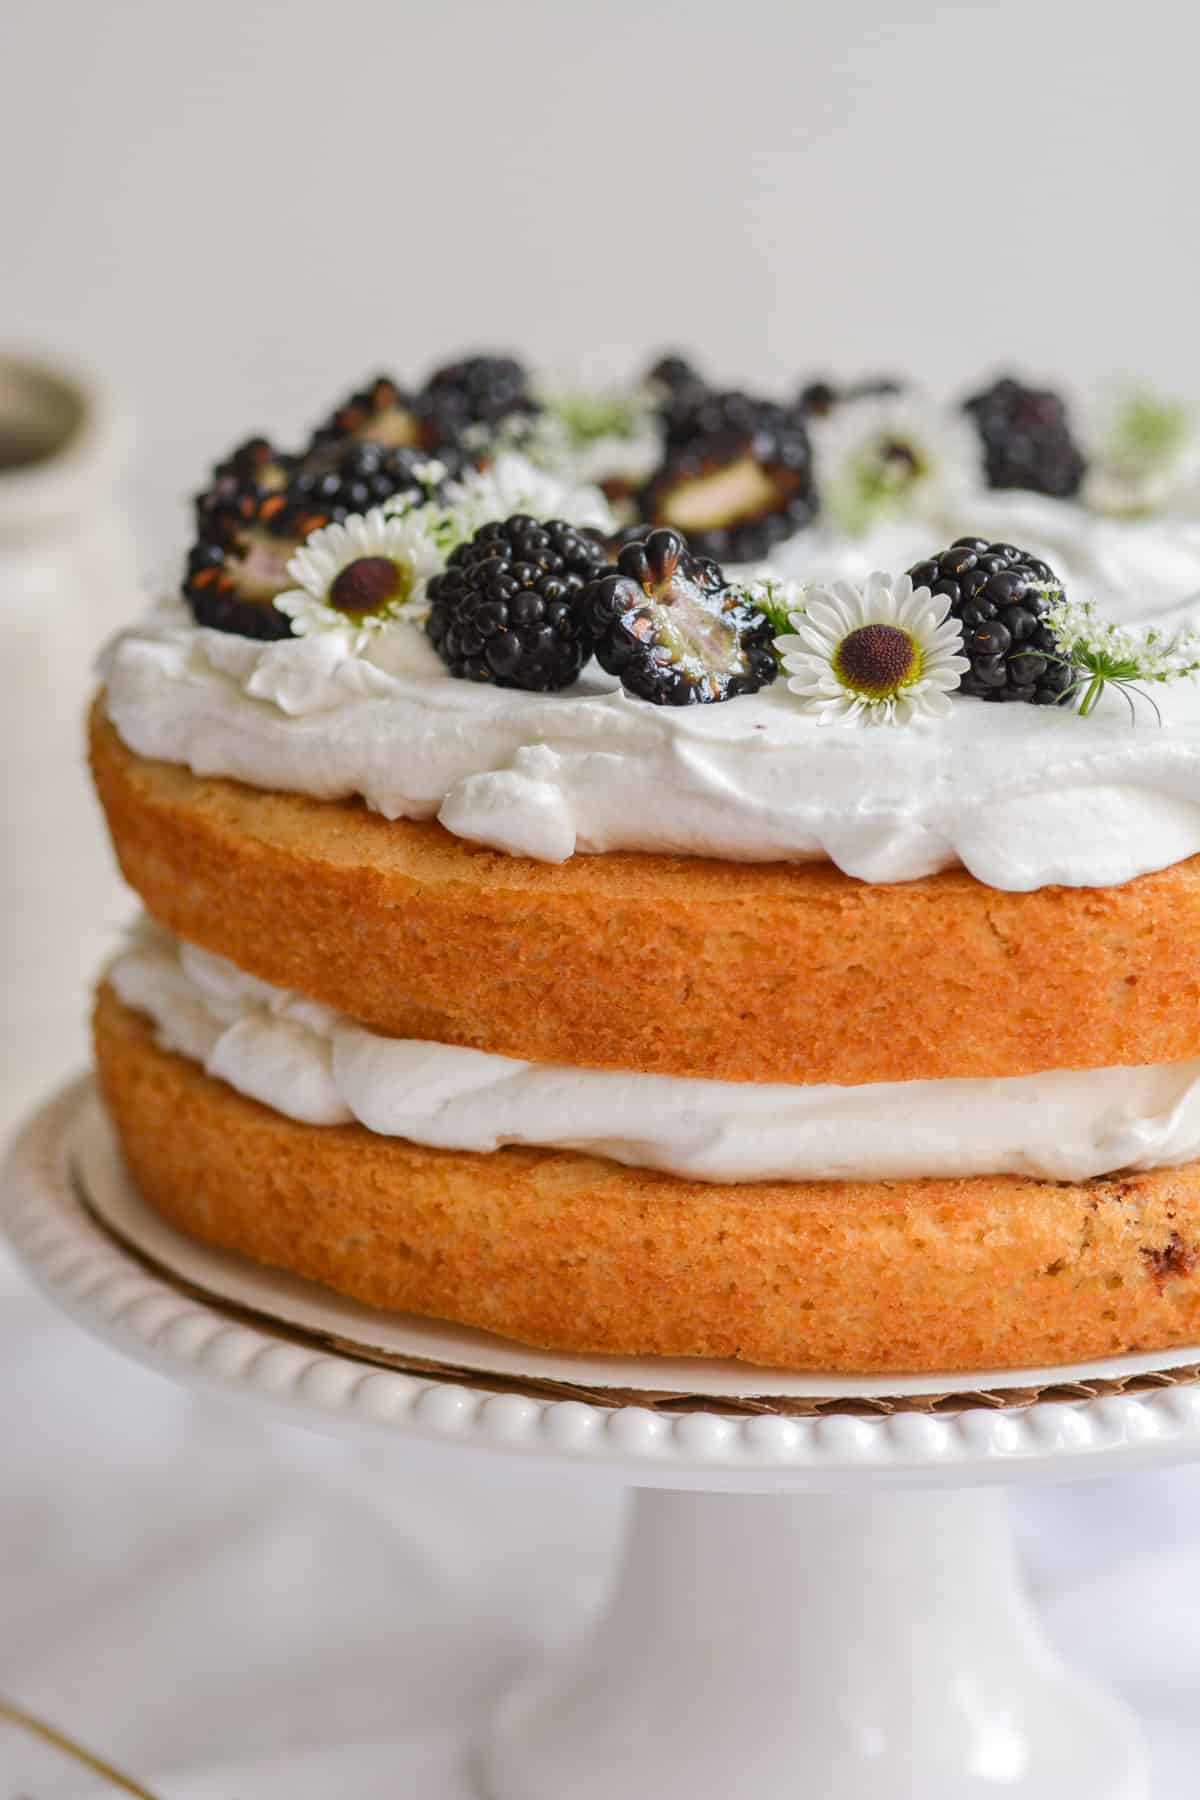 Picture of a Vegan Blackberry Chantilly layer cake on a cake stand